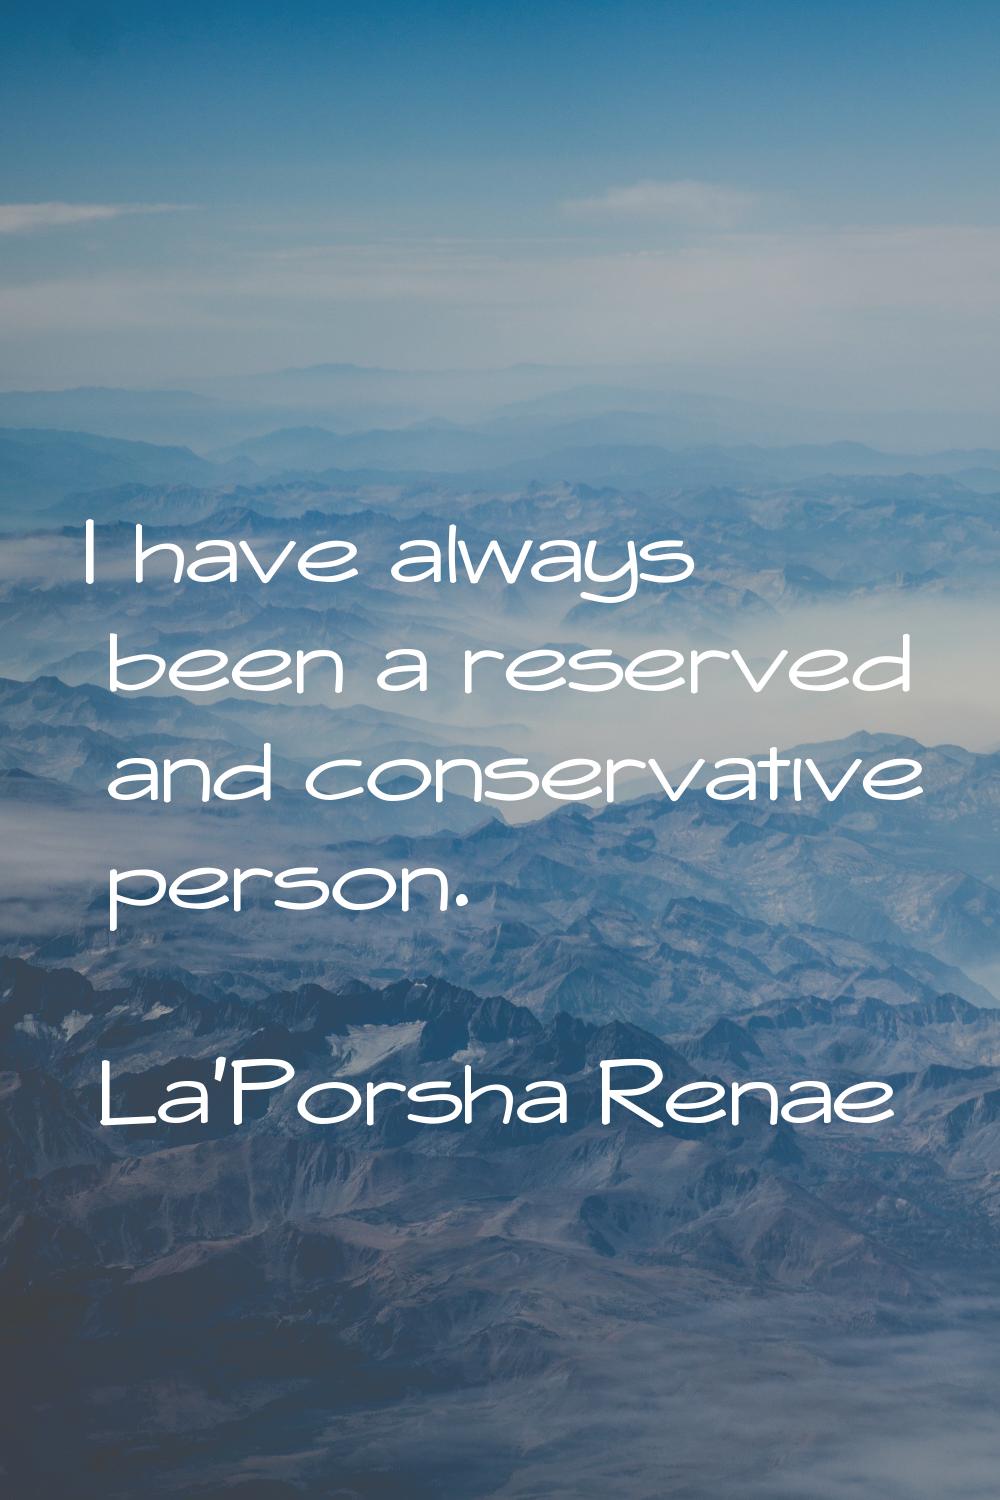 I have always been a reserved and conservative person.